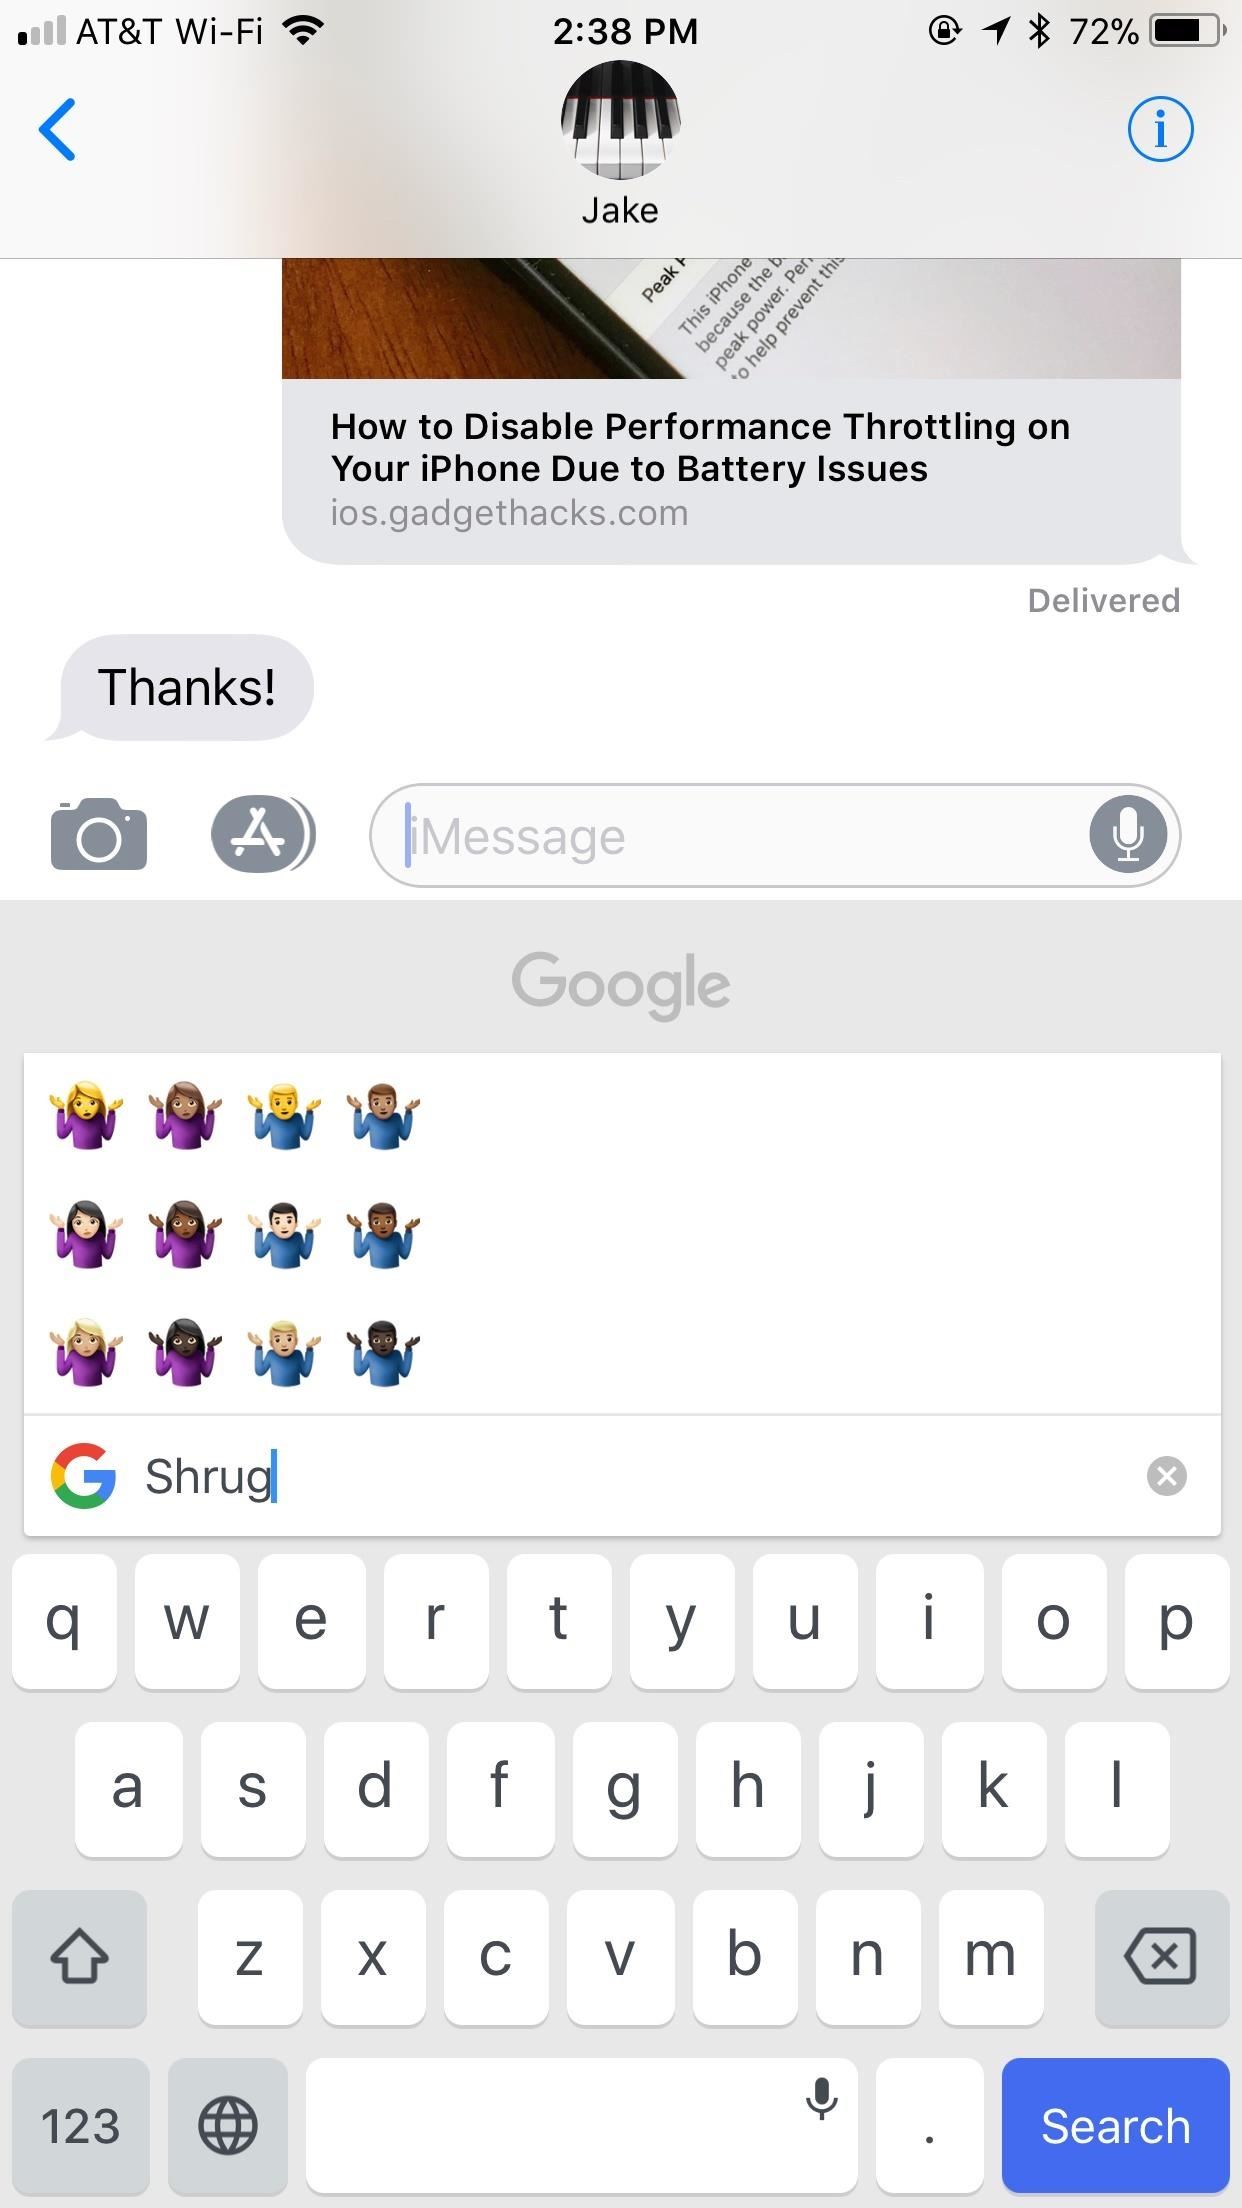 Gboard Makes Finding Emojis Even Easier on iPhone